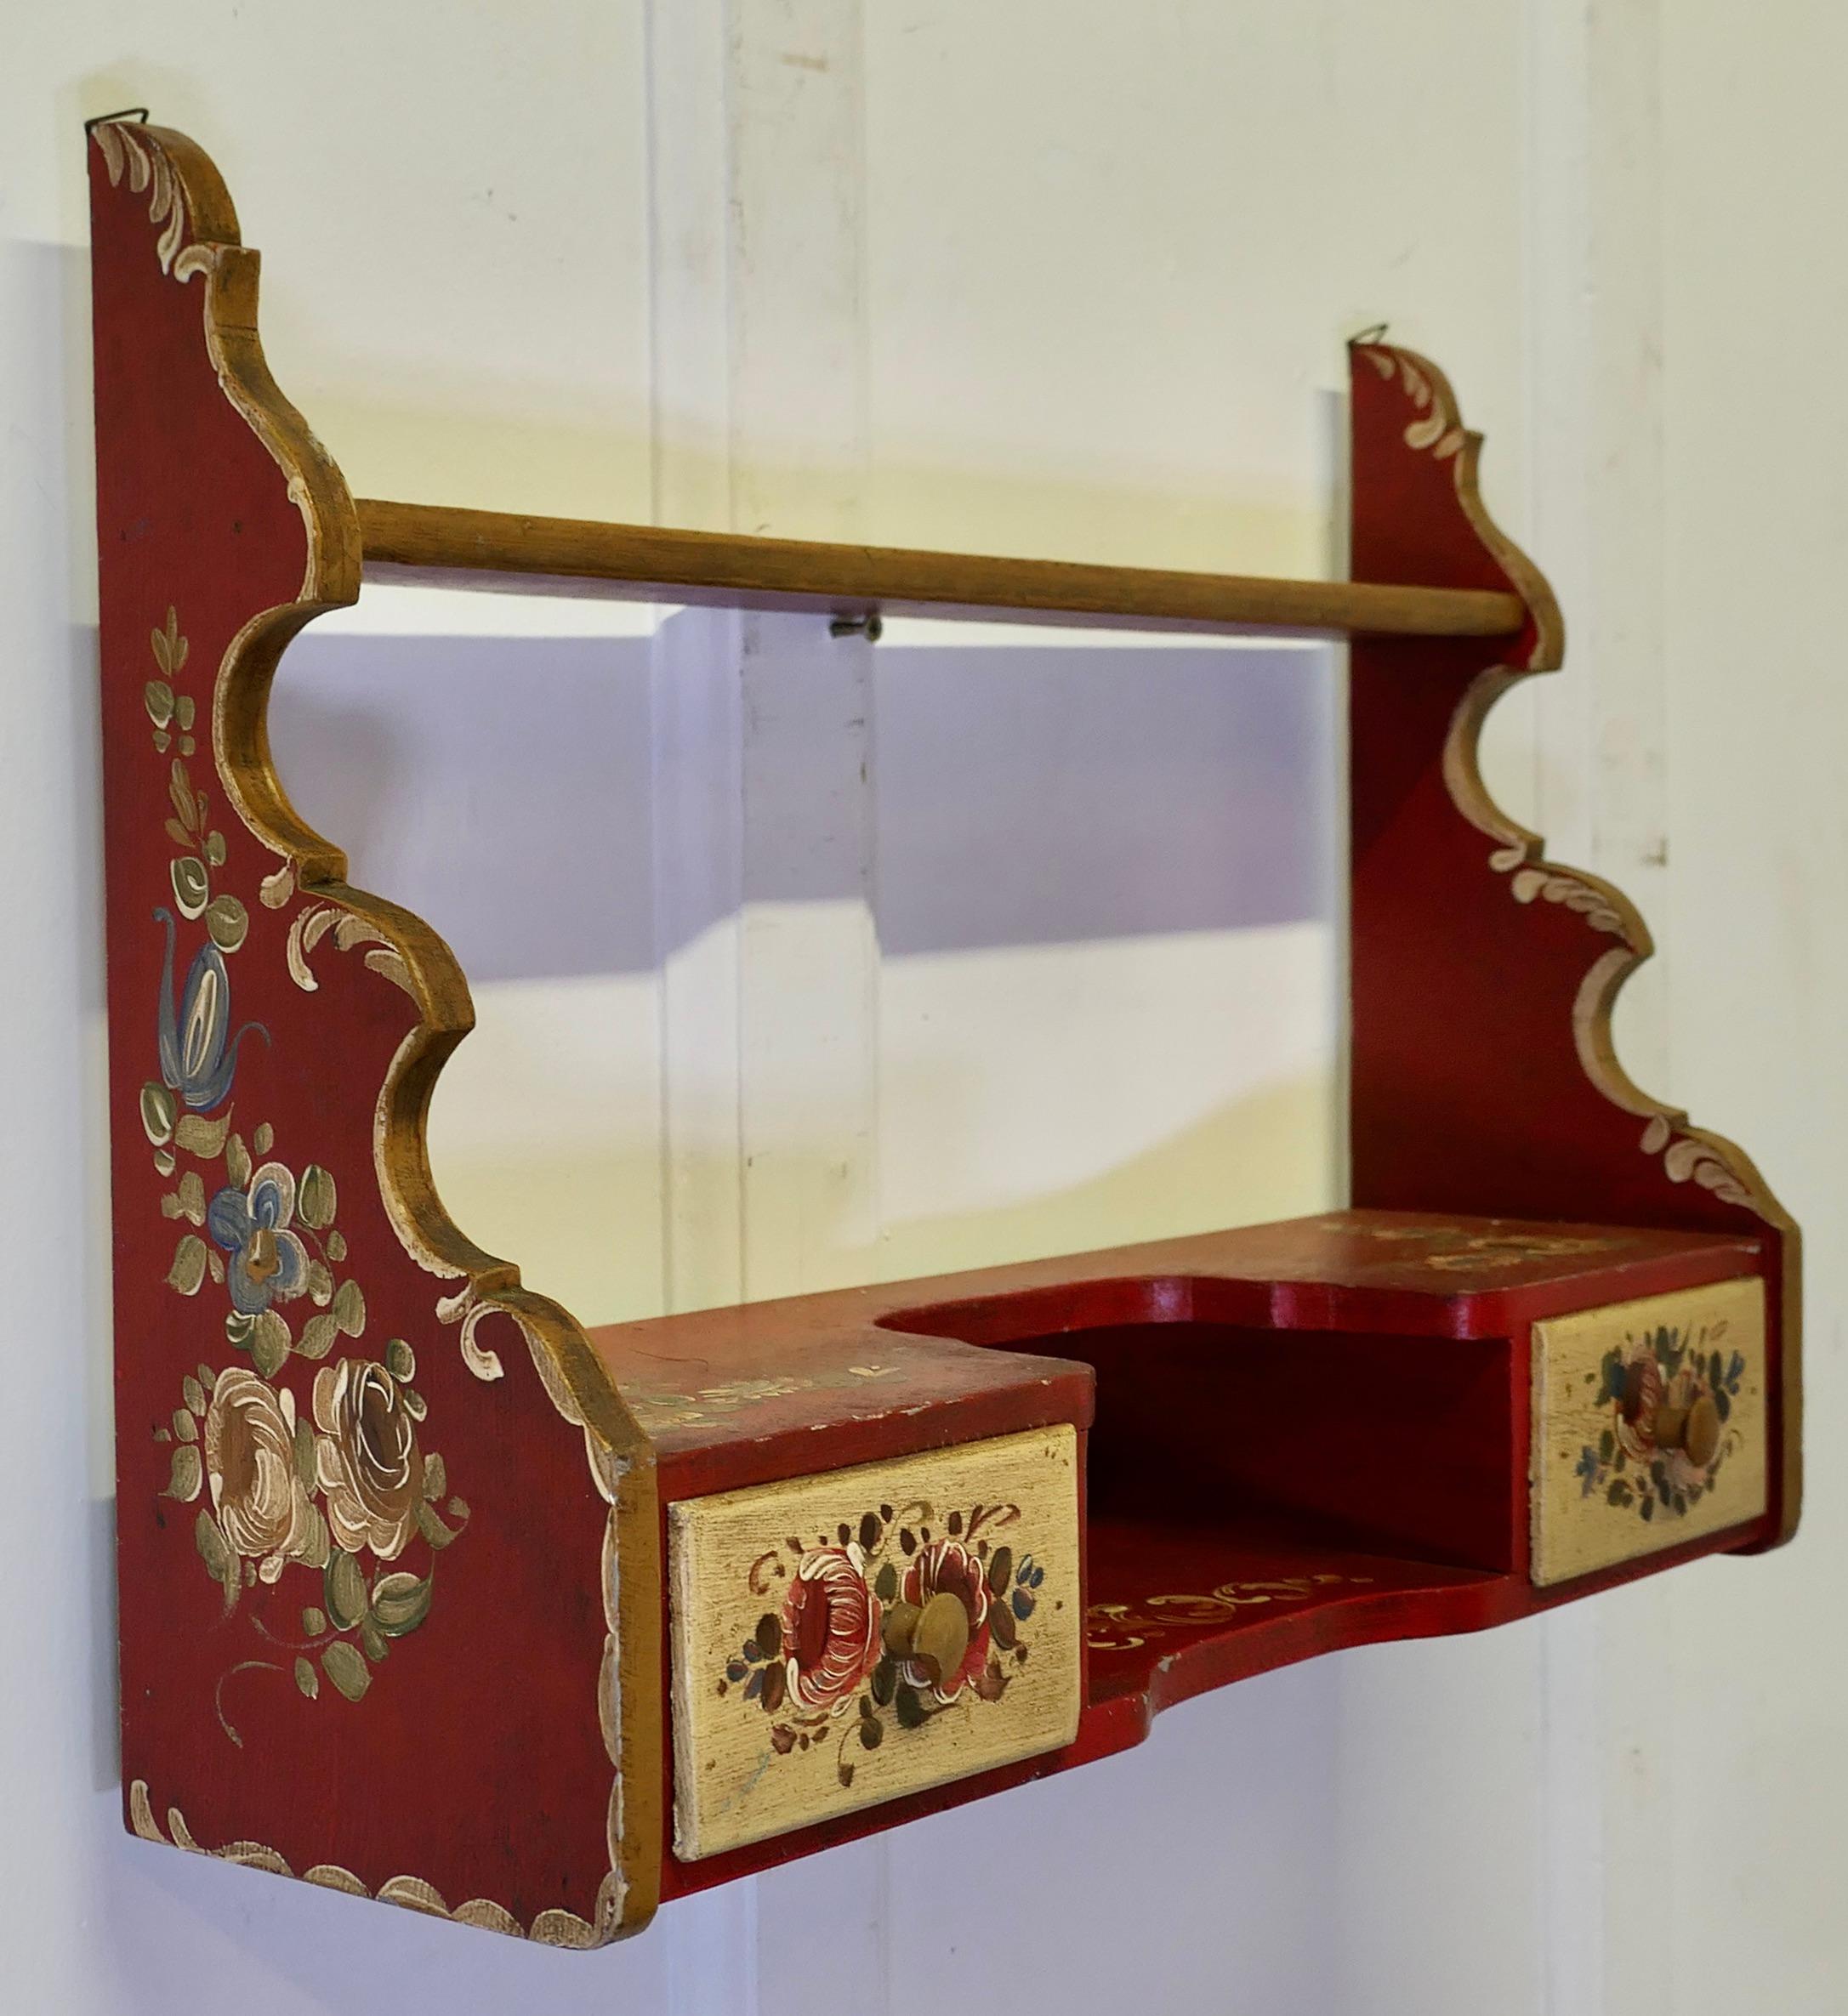 Pine Rustic Painted Folk Art Wall Shelf with Drawers